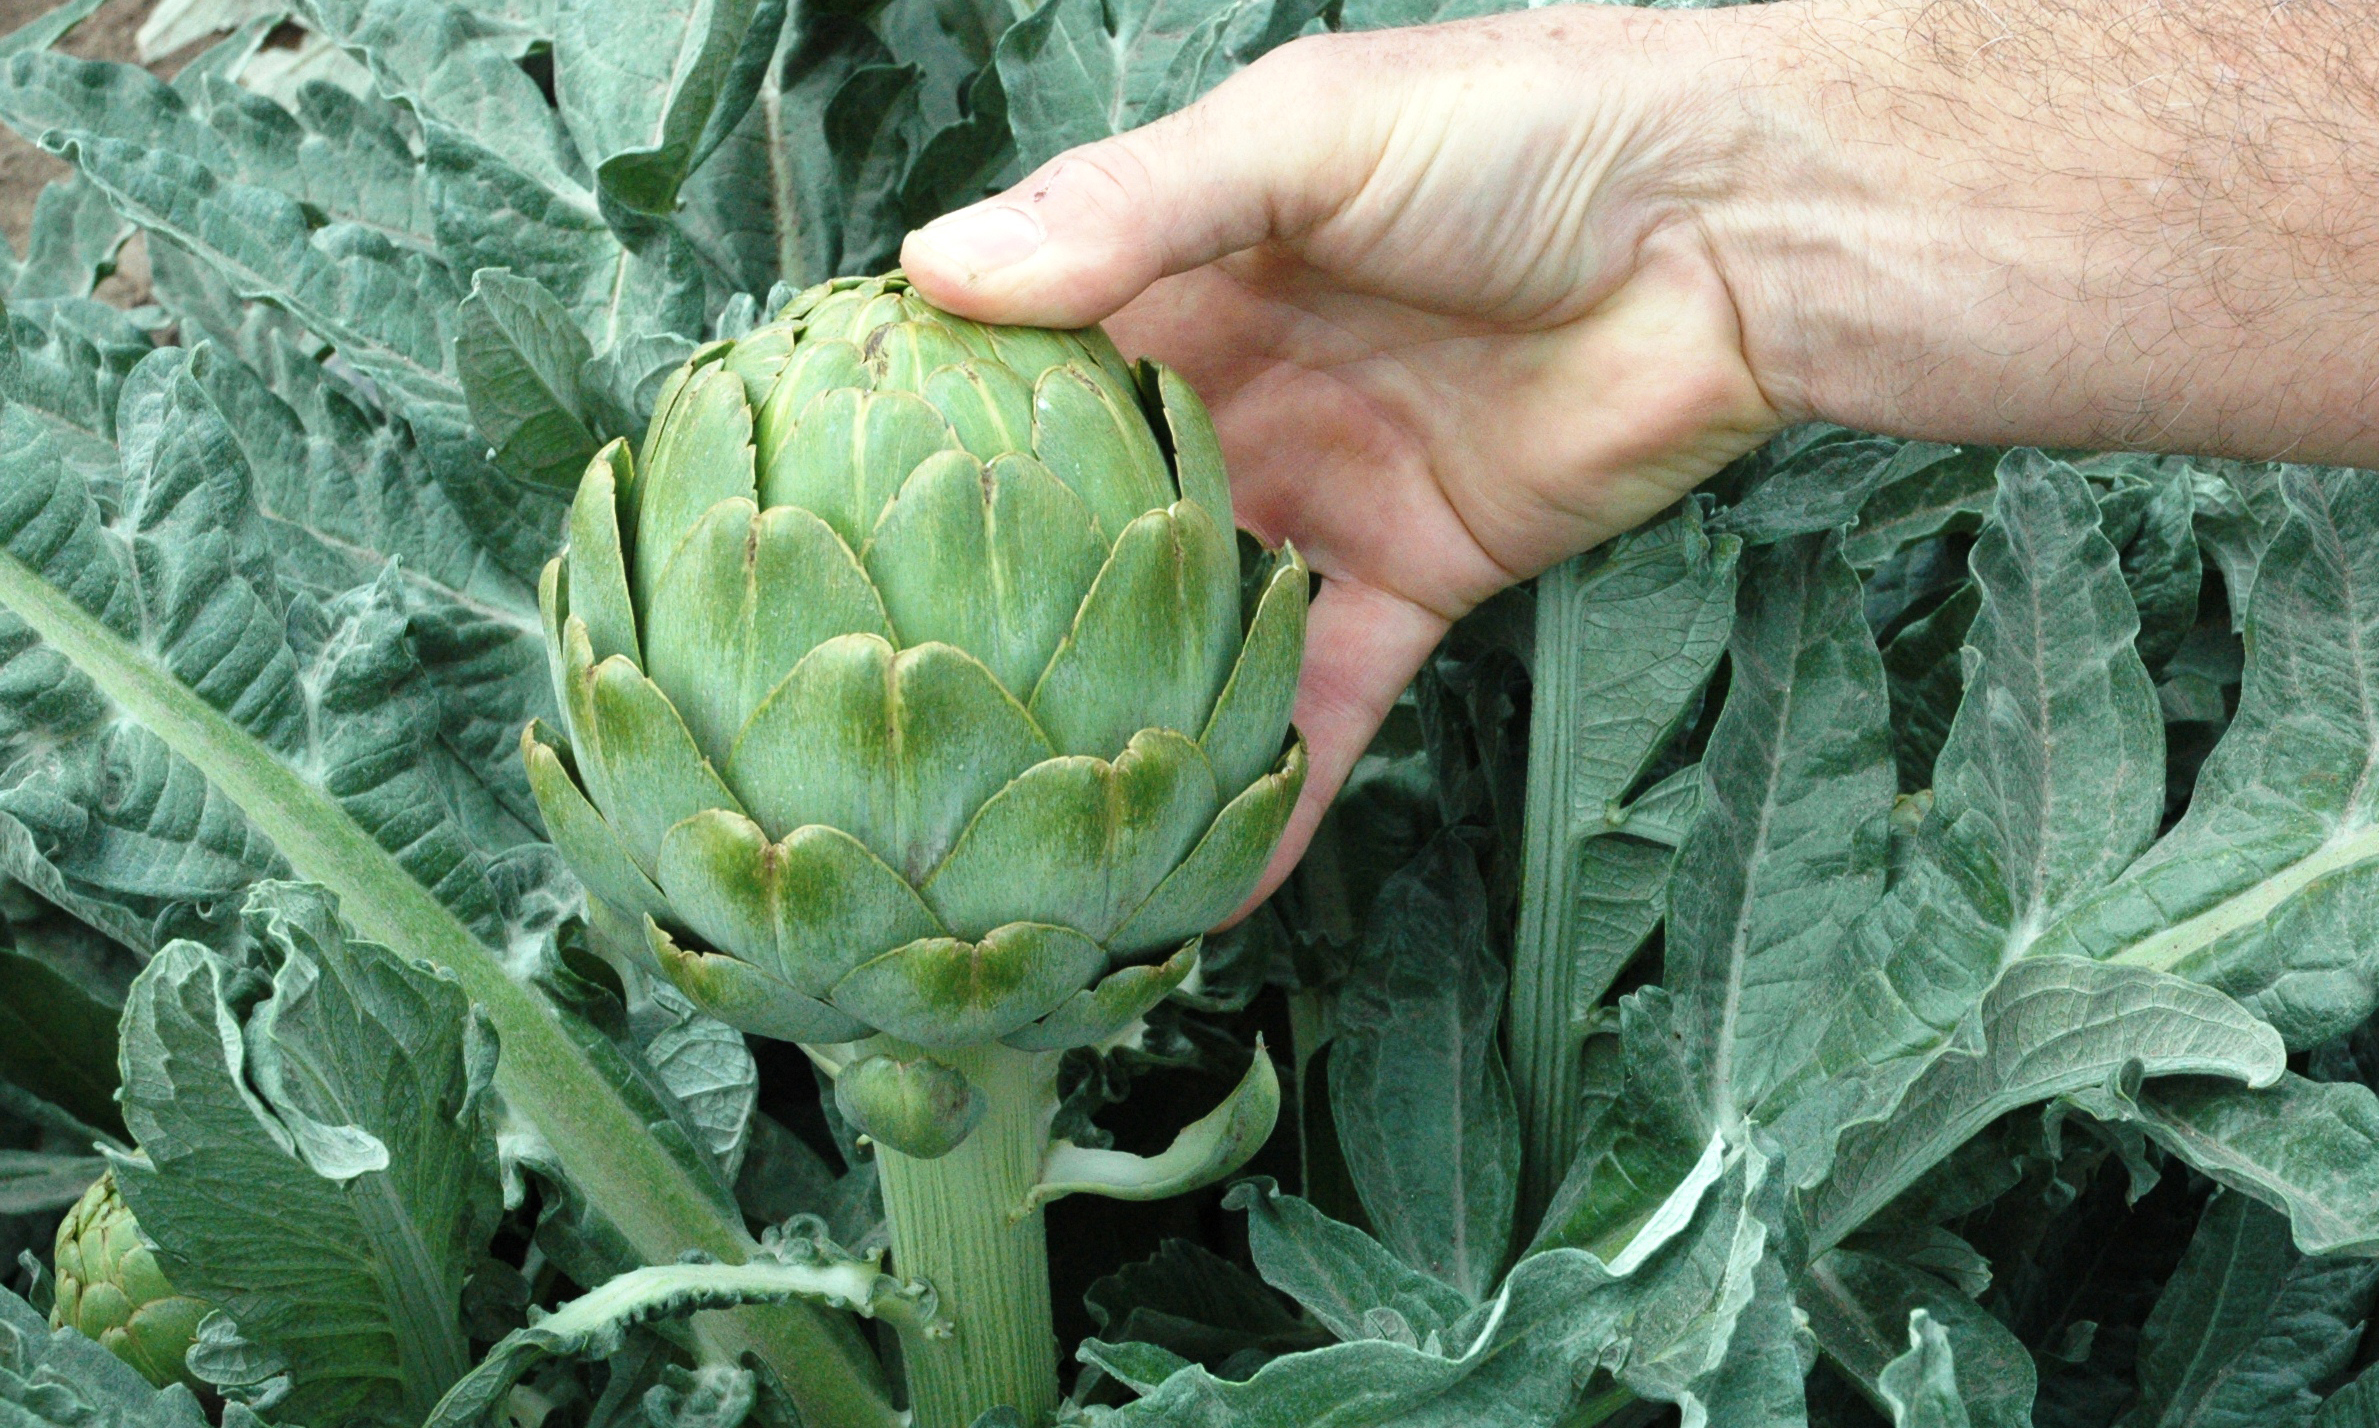 What are the health benefits of artichokes?